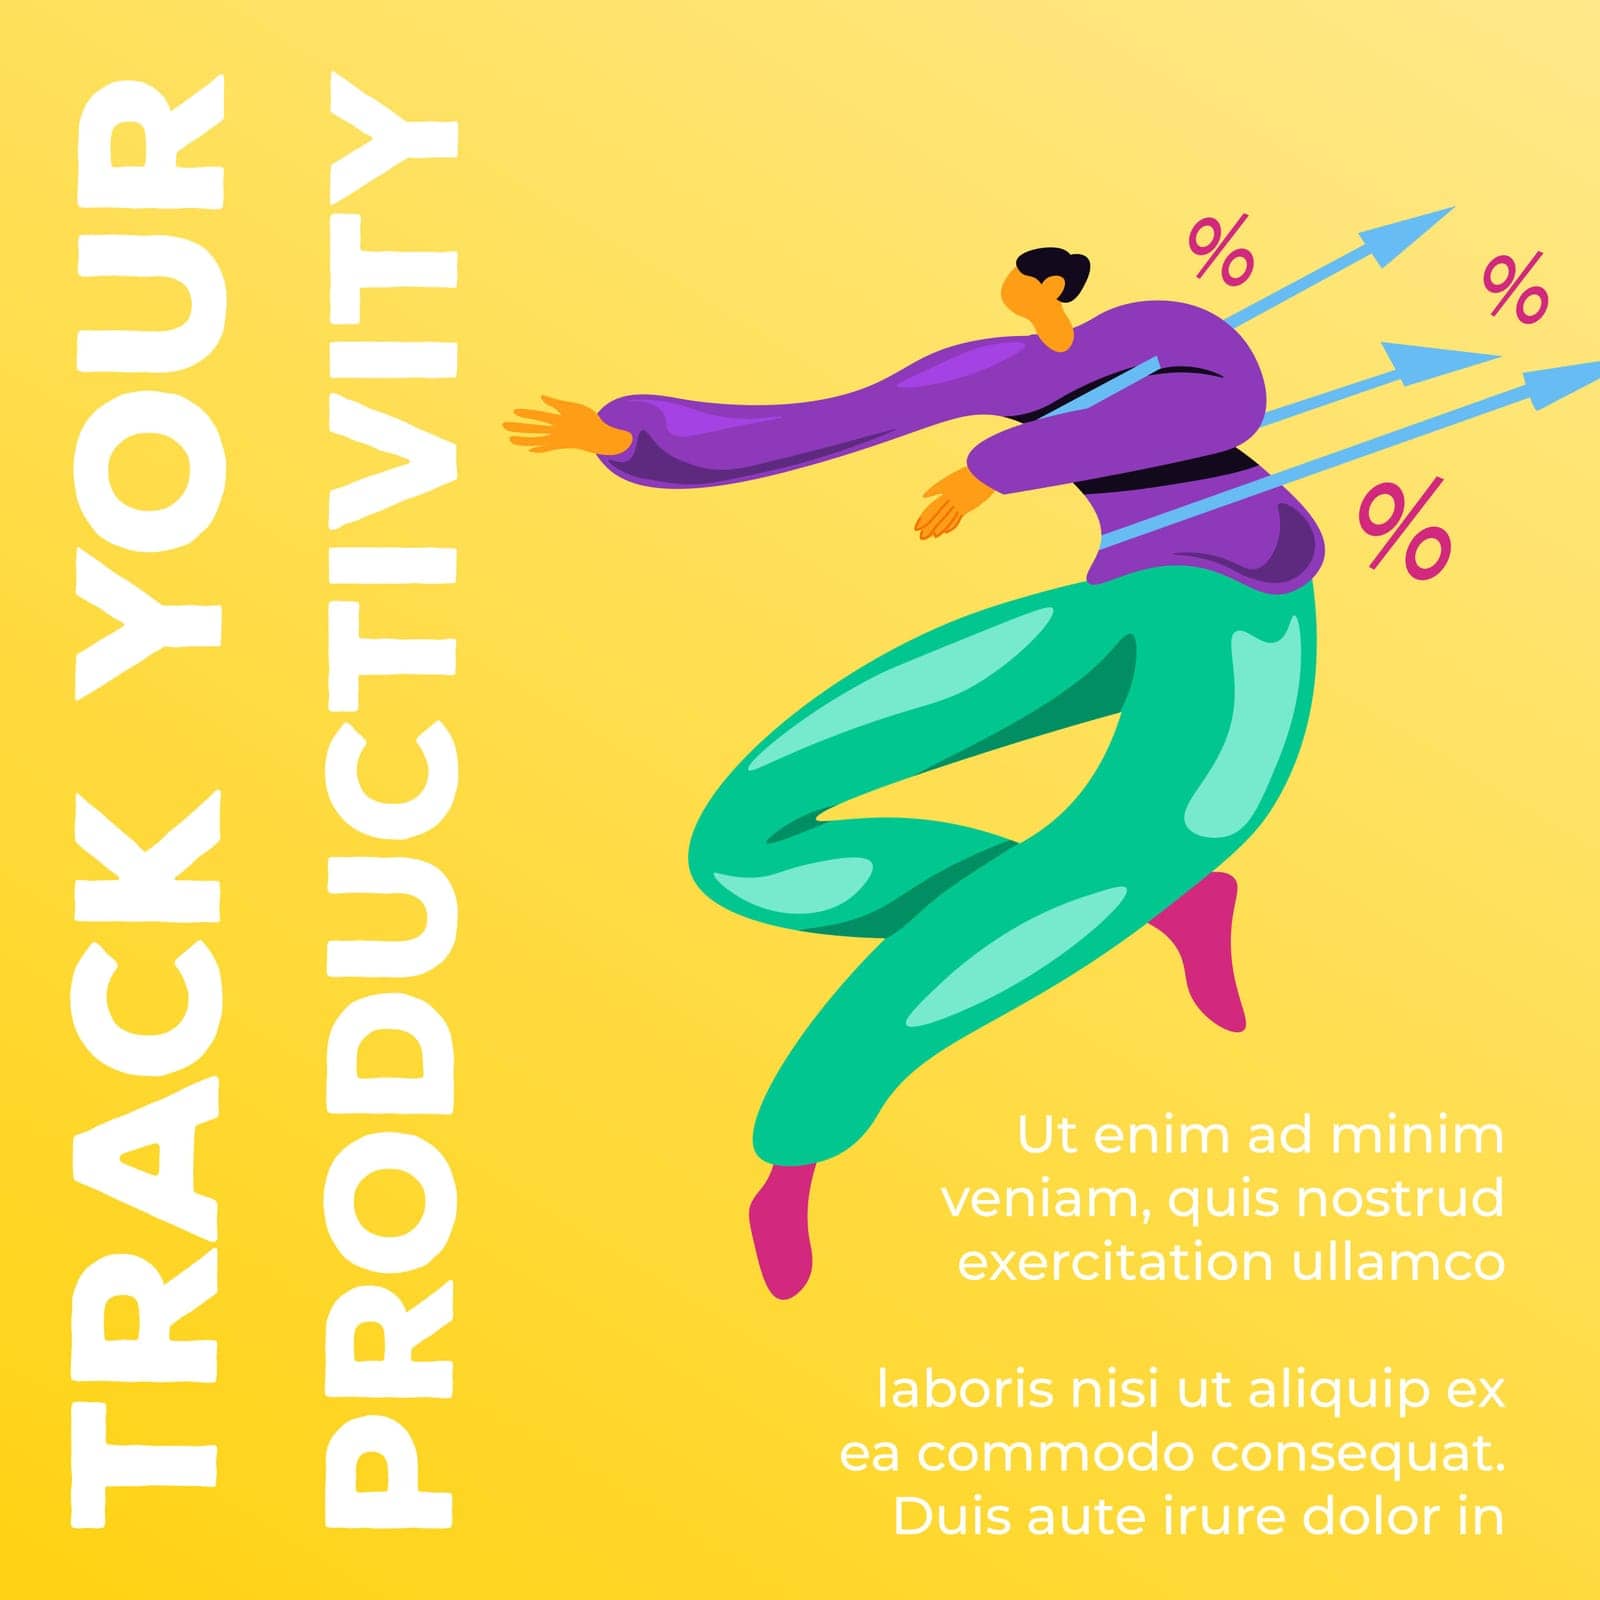 Application for tracking your productivity and energy levels at work. Know your maximum and keep pace at project. Promotional banner with tips and recommendations for workers. Vector in flat style